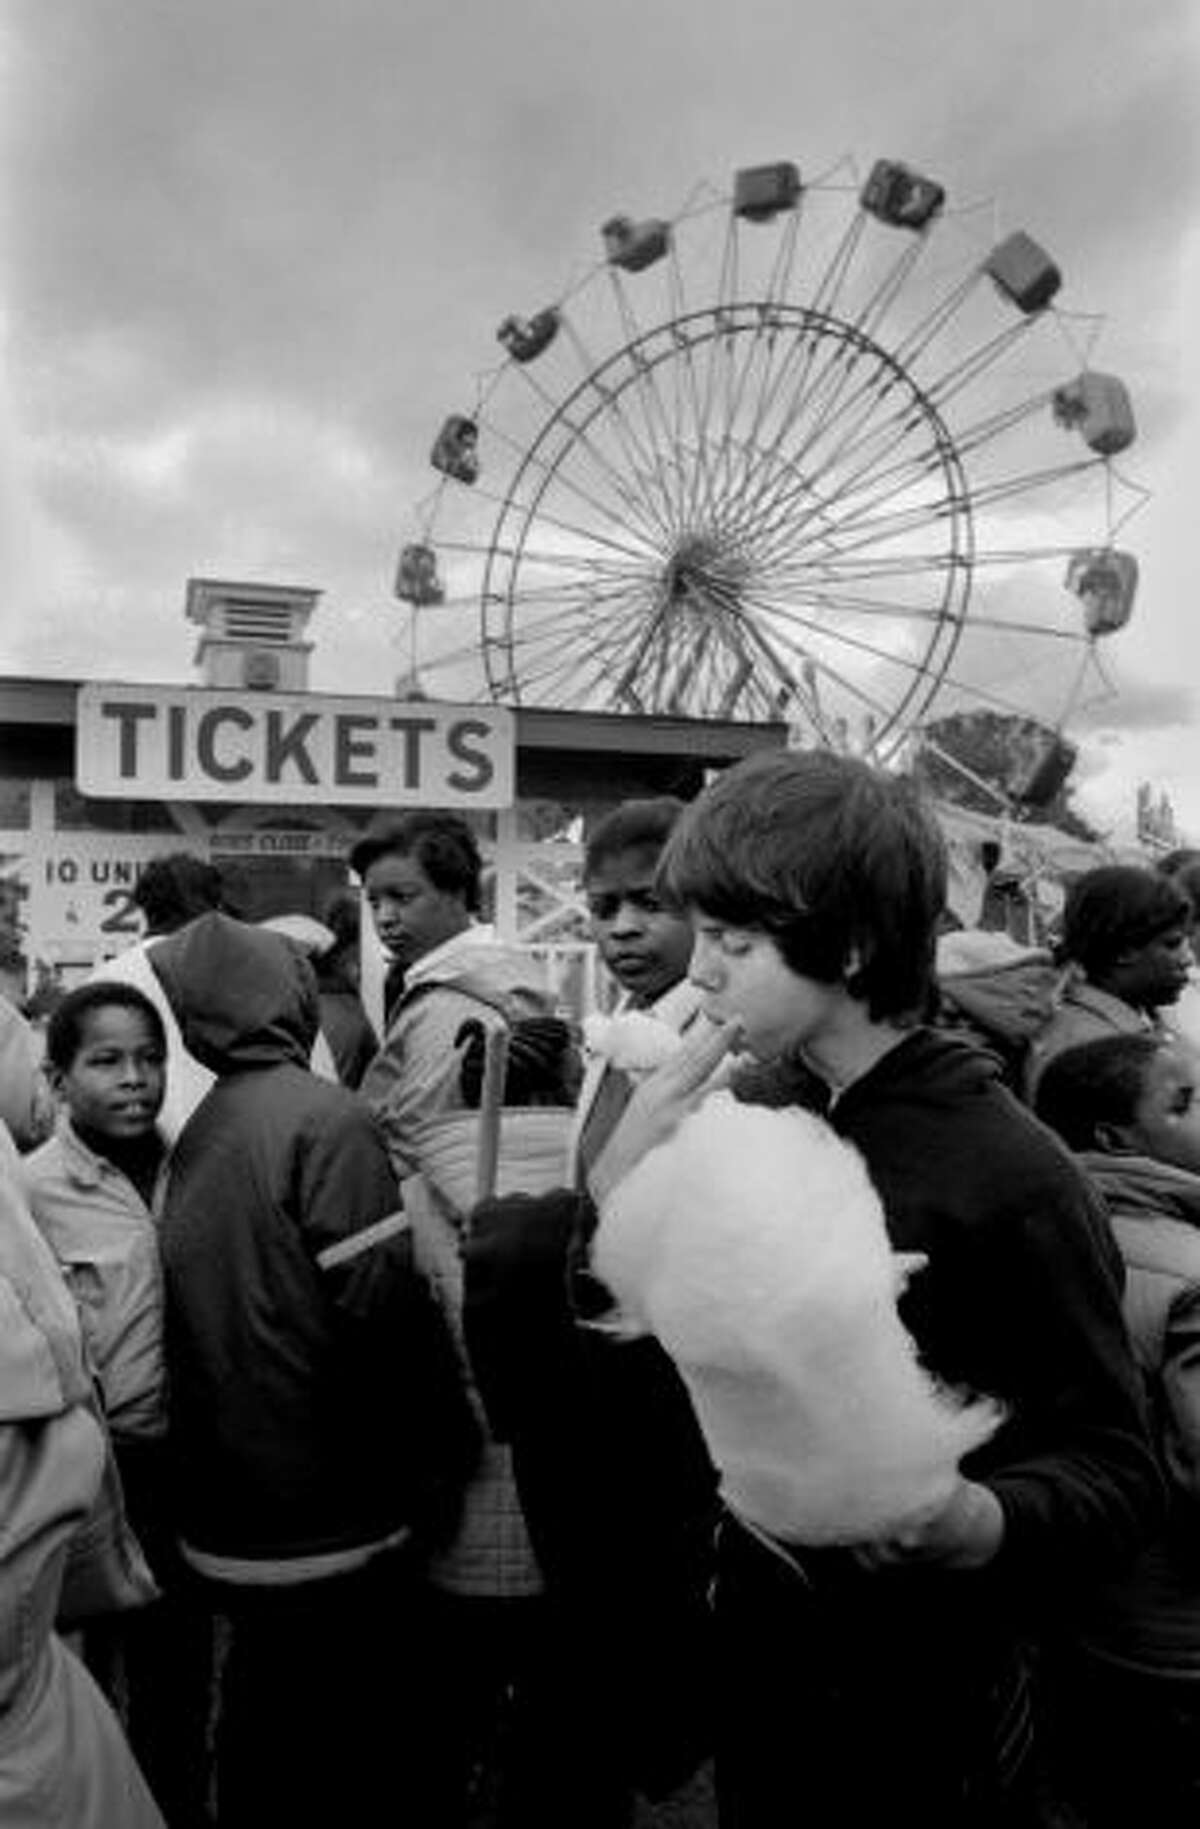 You remember or know someone who remembers going to the Danbury Fair.